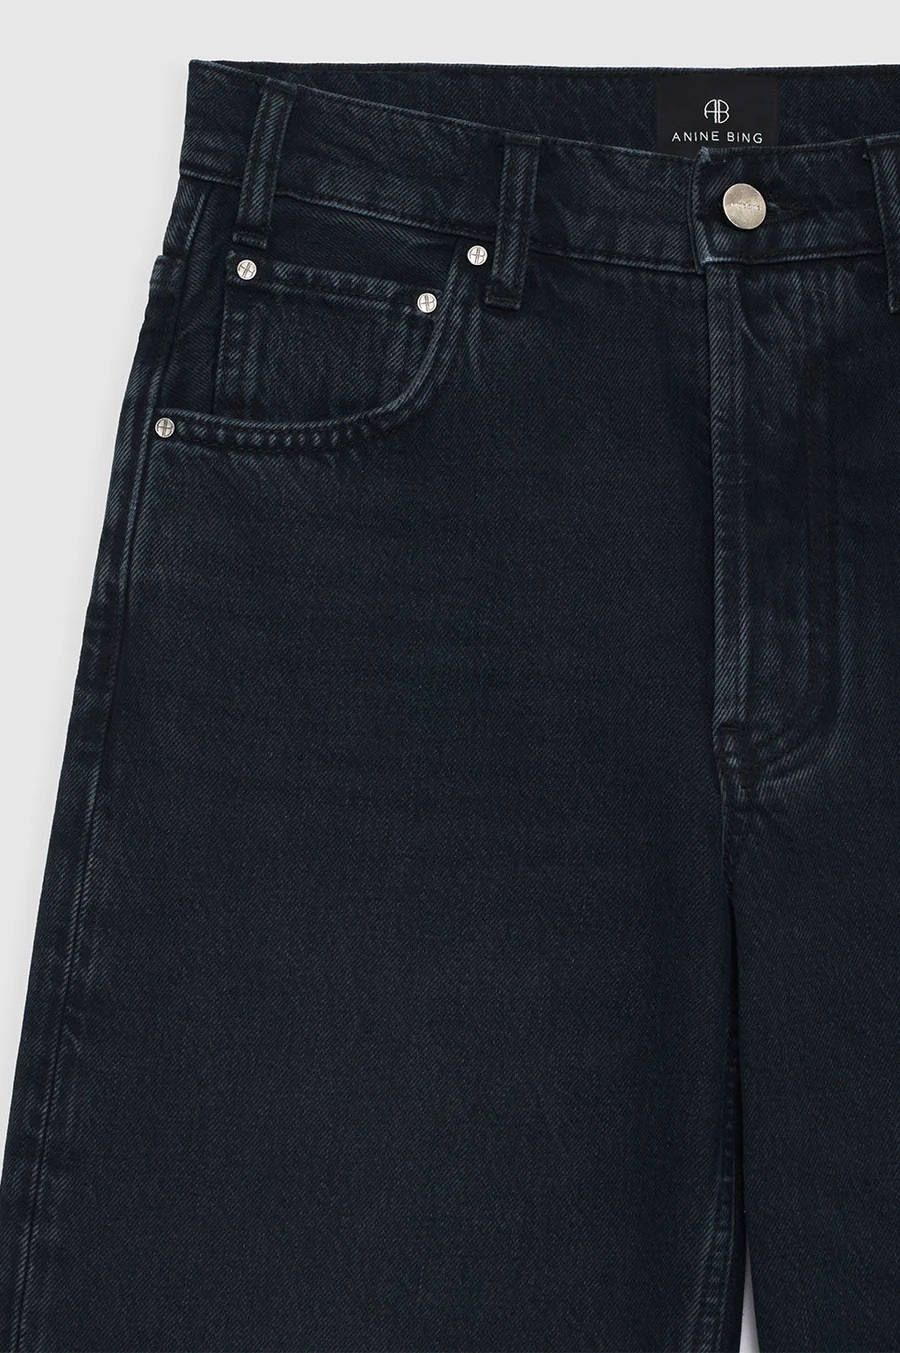 ANINE BING Roy Jeans in Avalon Blue 26